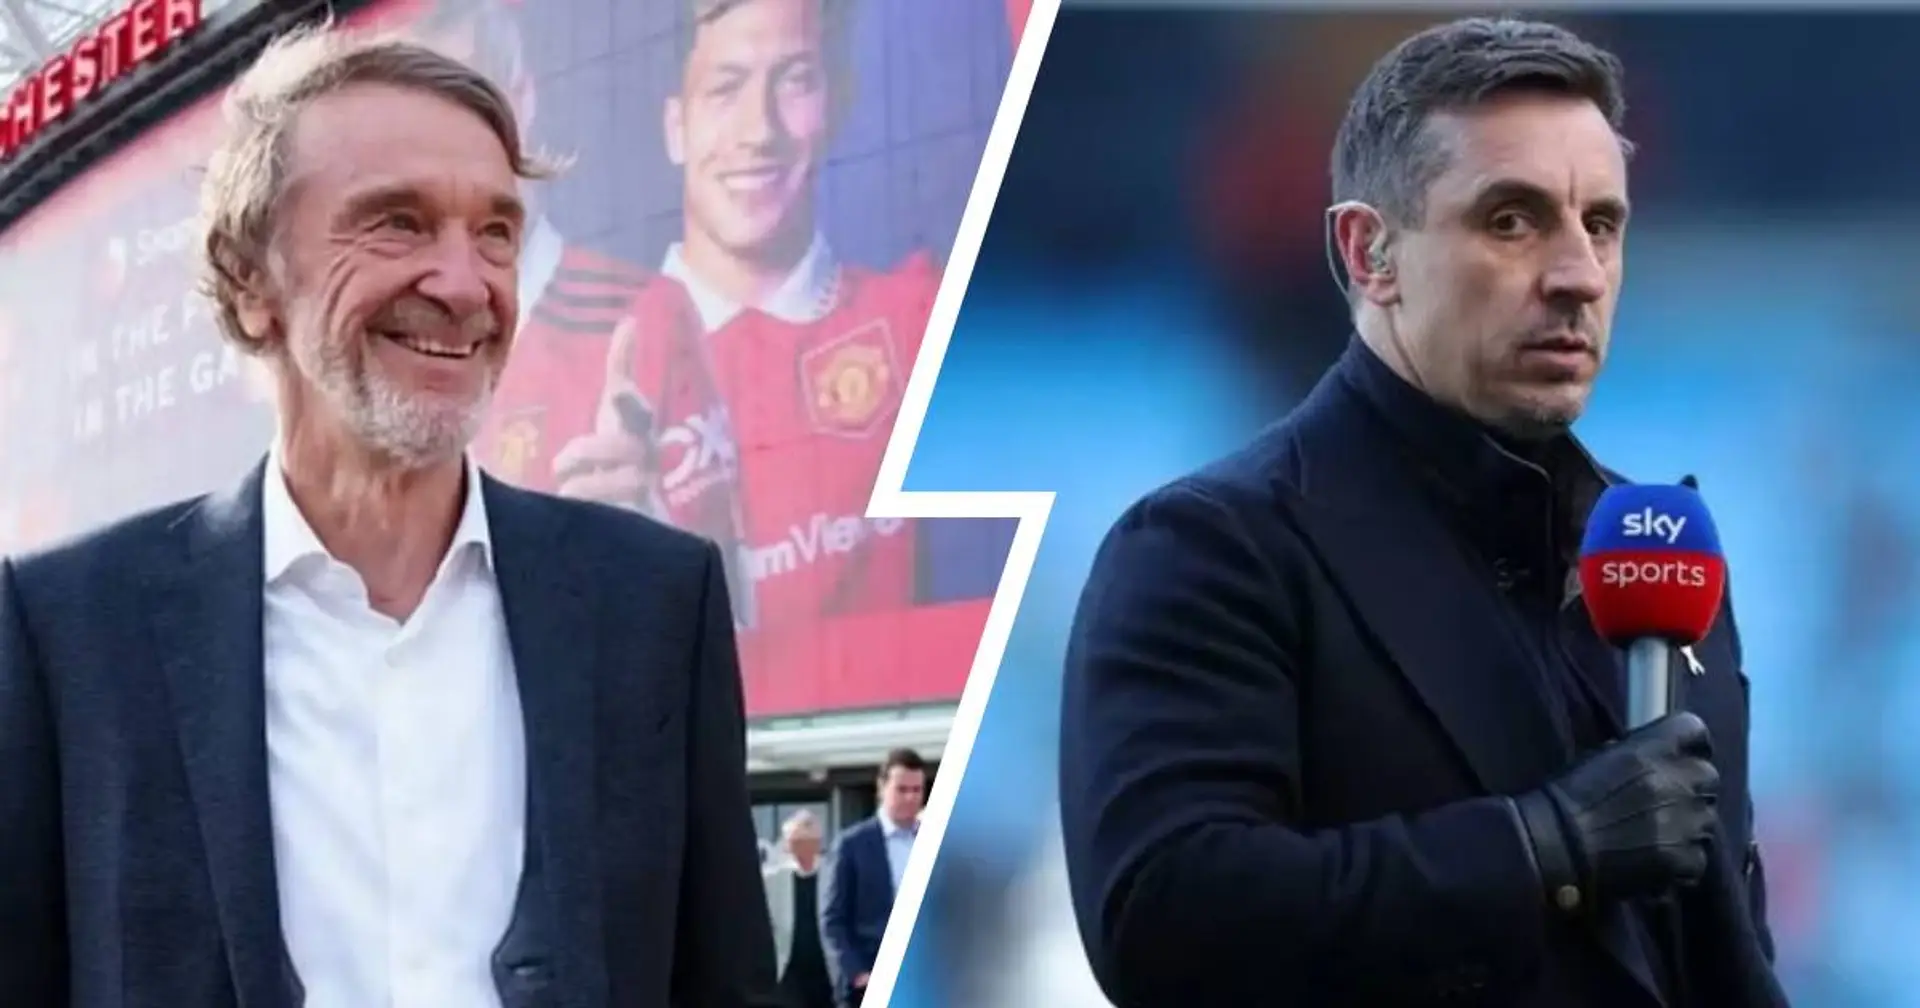 Sir Jim Ratcliffe 'invites' Gary Neville to help redevelop Old Trafford